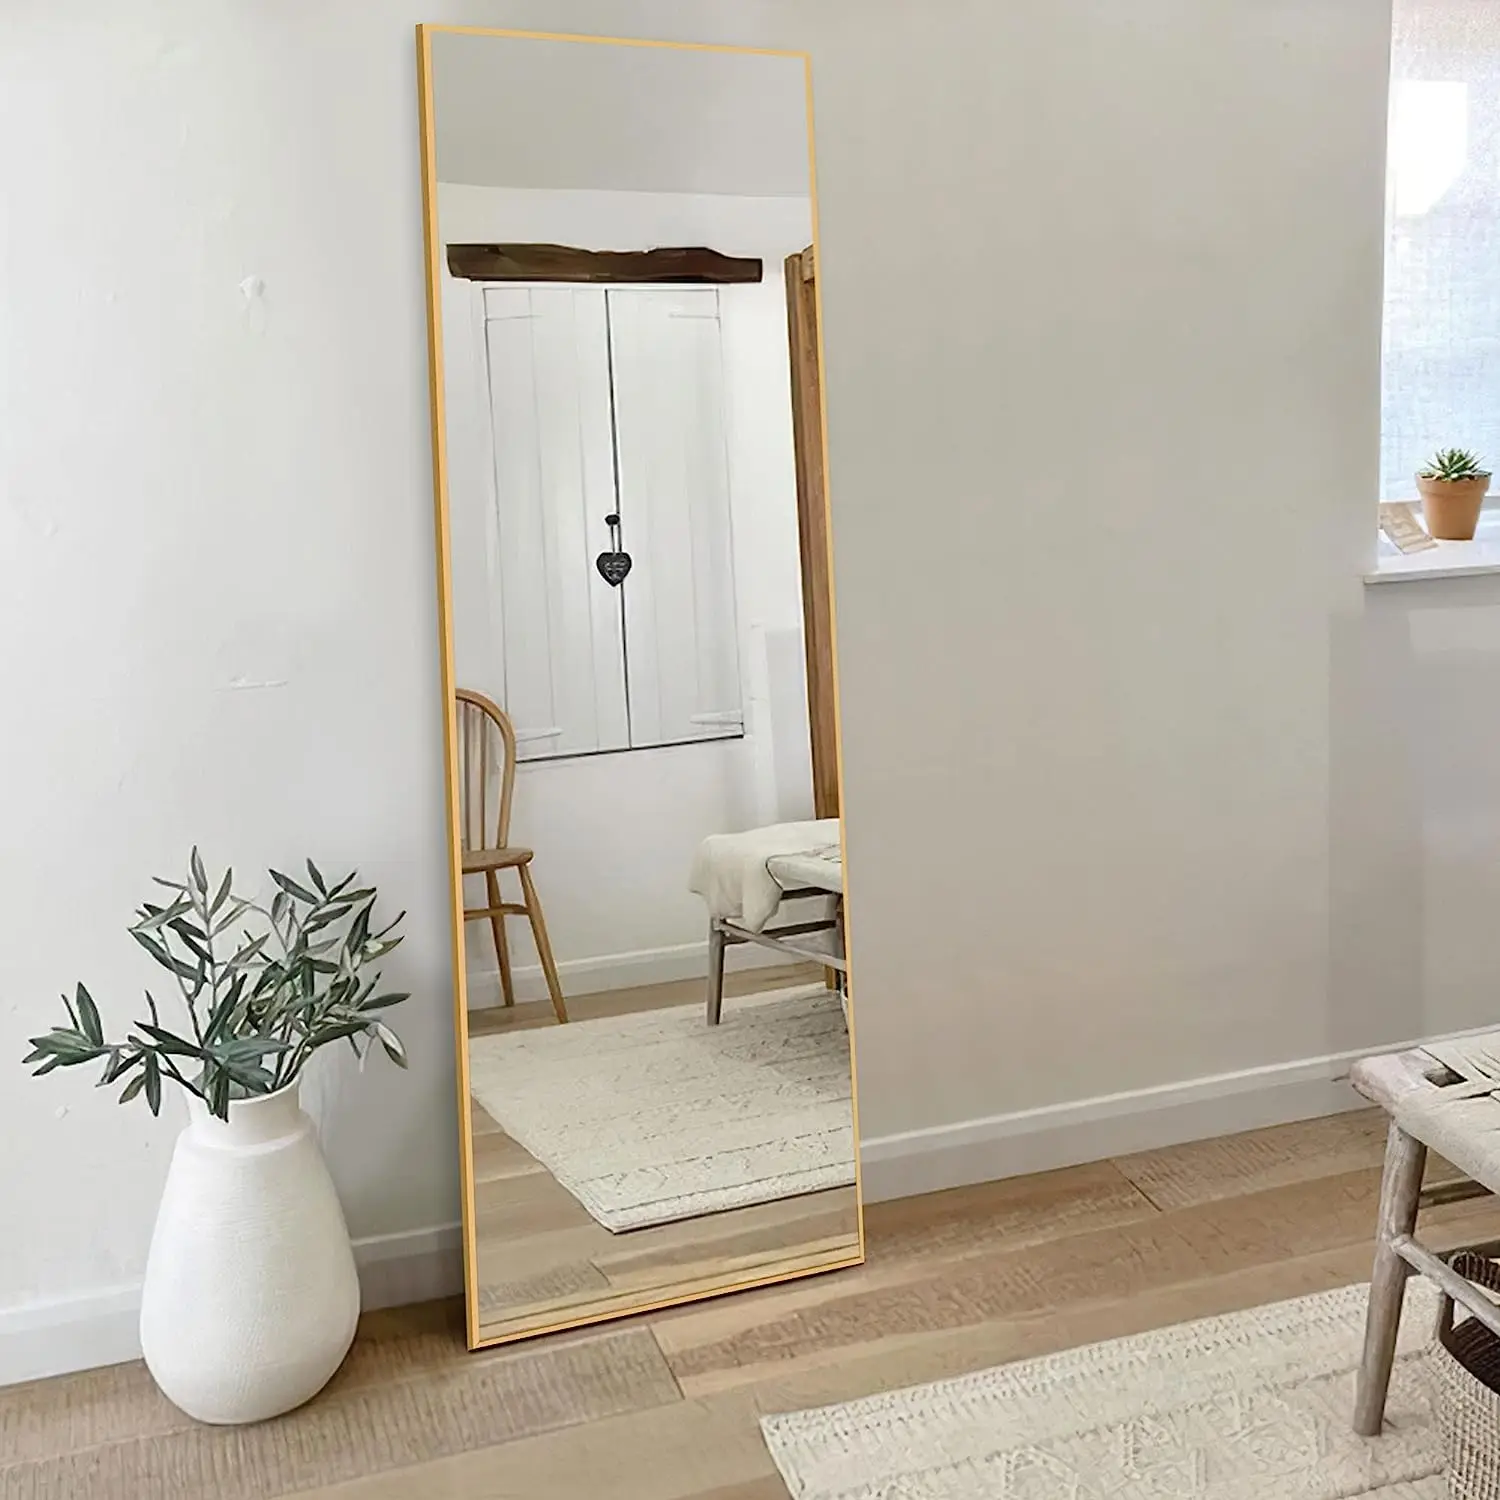 

Full Length Floor Mirror with Stand 59"x20" Large Wall Mounted Full Body Mirror Horizontal/Vertical Bedroom Mirror Dress